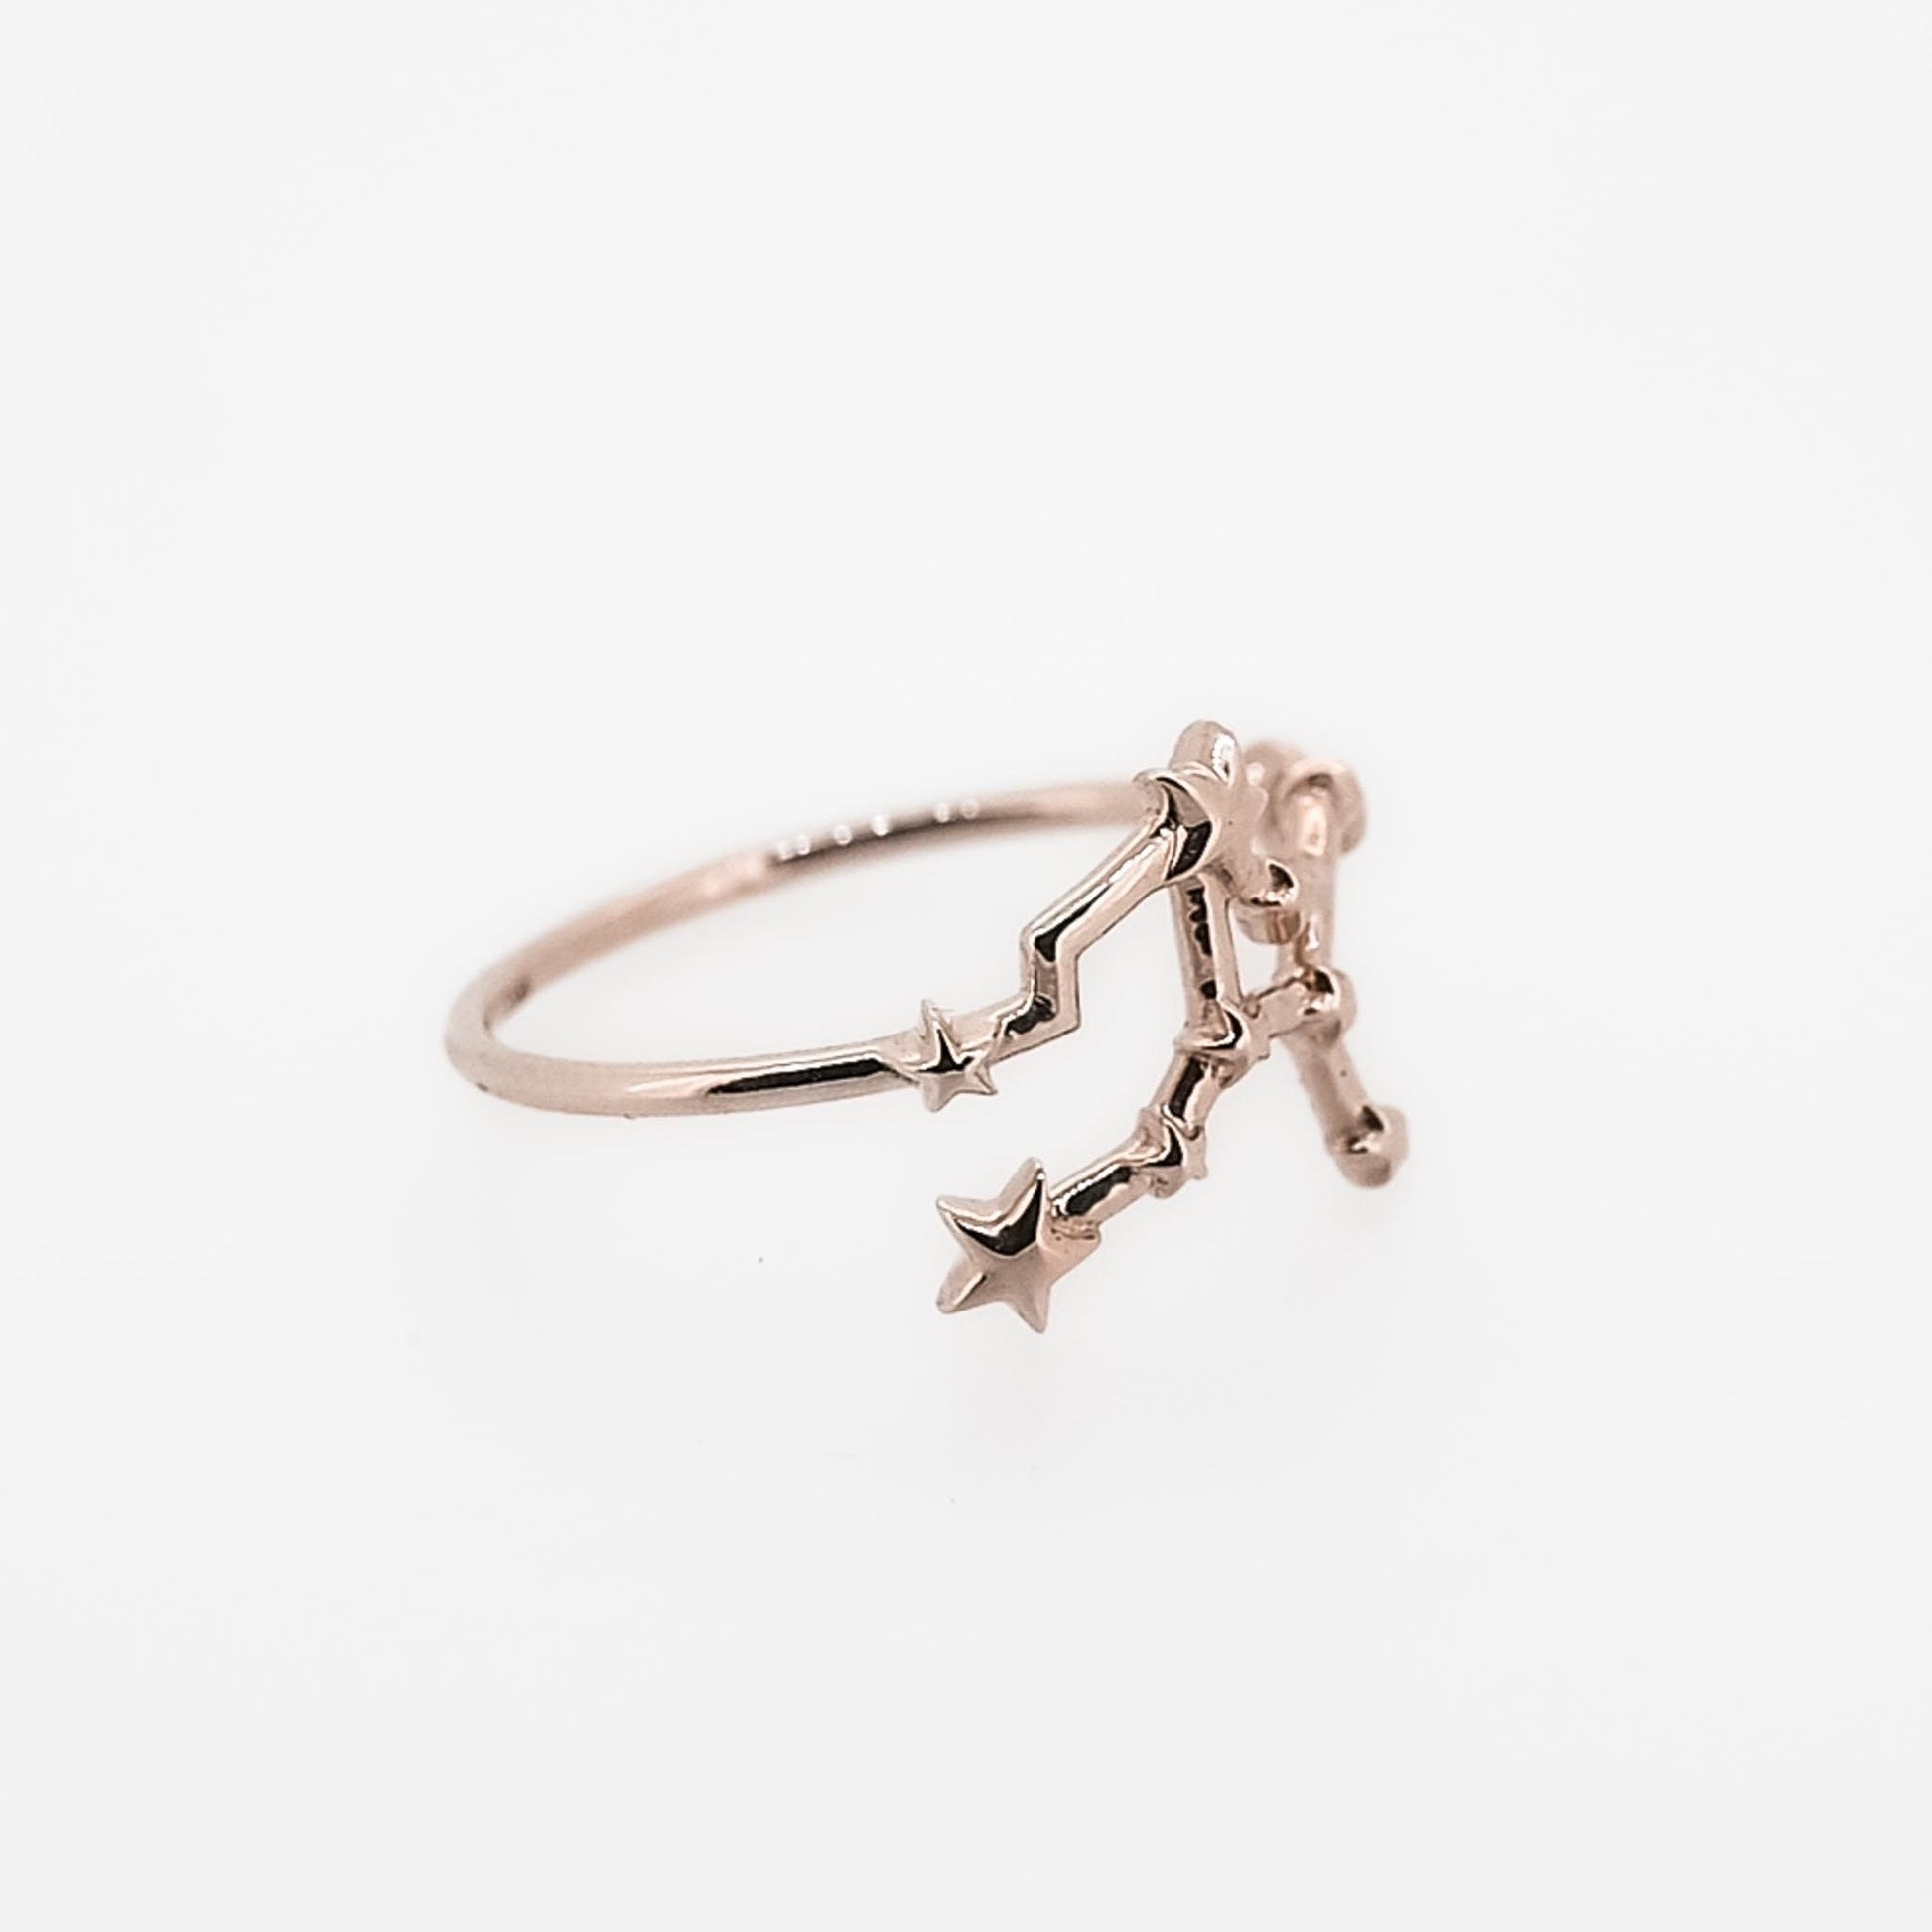 Solid Gold Virgo, Star Sign Dainty Celestial Zodiac Ring in solid 14K Yellow Gold, 14k White Gold, 14K Rose Gold